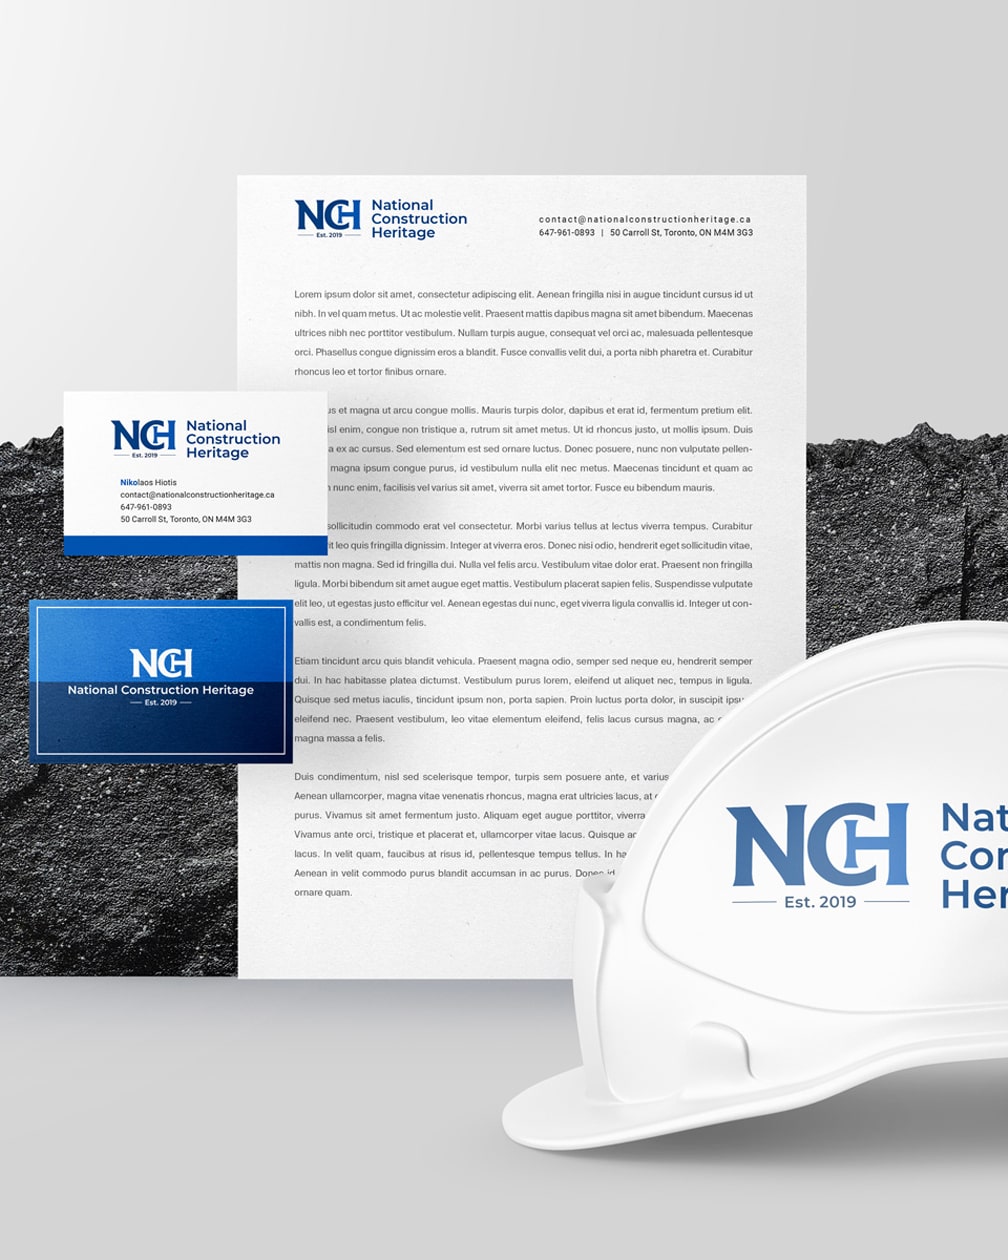 Professional branding materials for National Construction Heritage, featuring a clean logo design on a white hard hat, letterhead, and business cards, exemplifying a polished logo design for building contractors established in 2019.